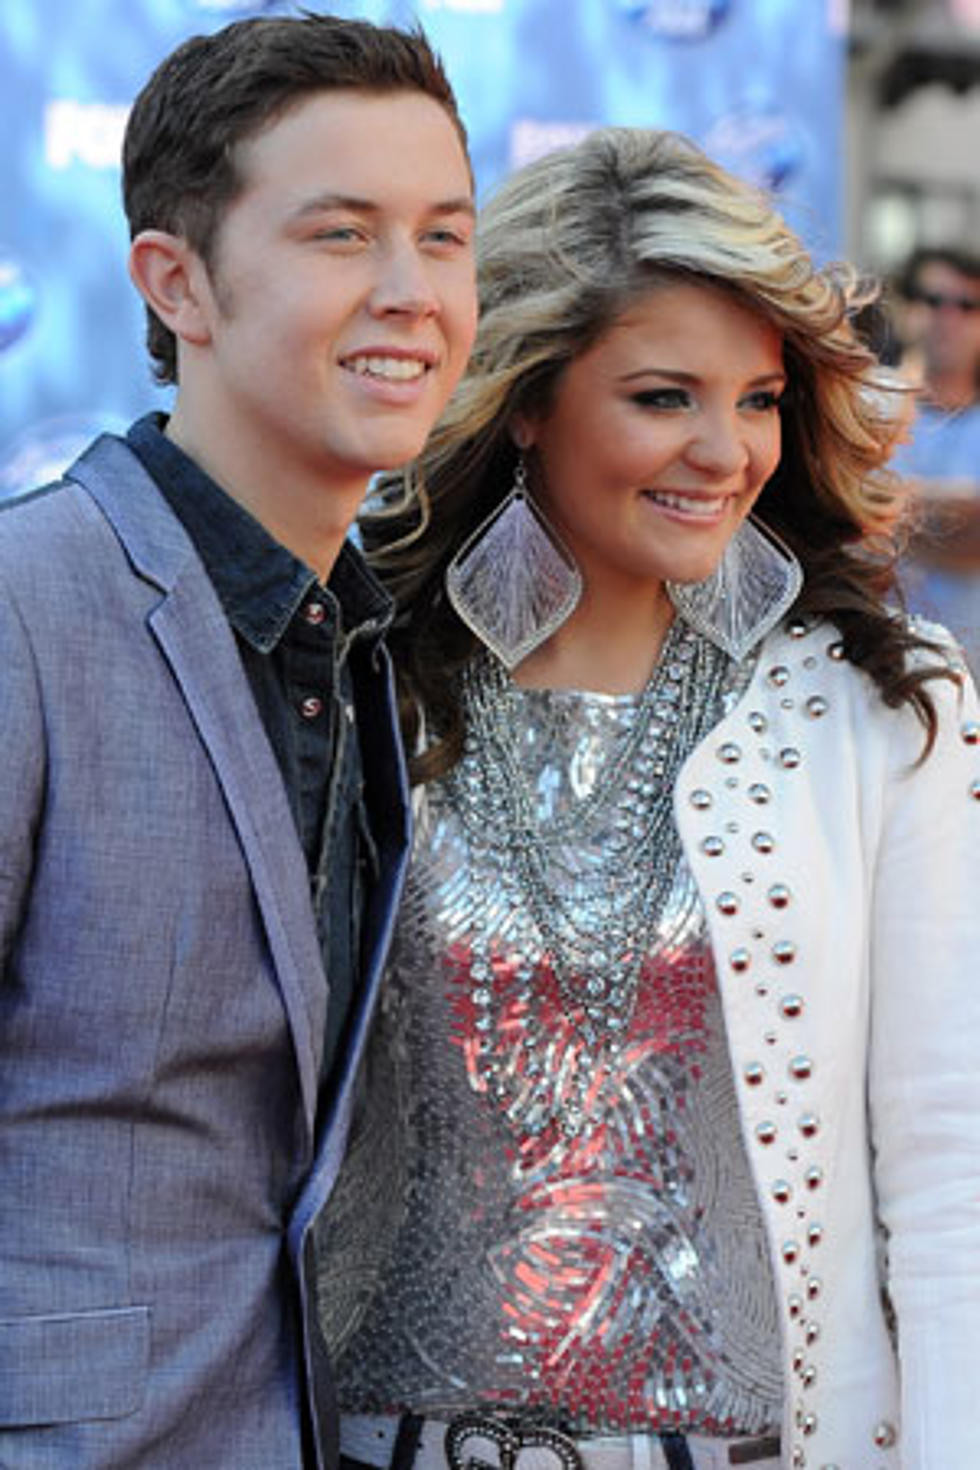 Top 10 News Stories of 2011: Scotty McCreery and Lauren Alaina Rumored to Be Dating